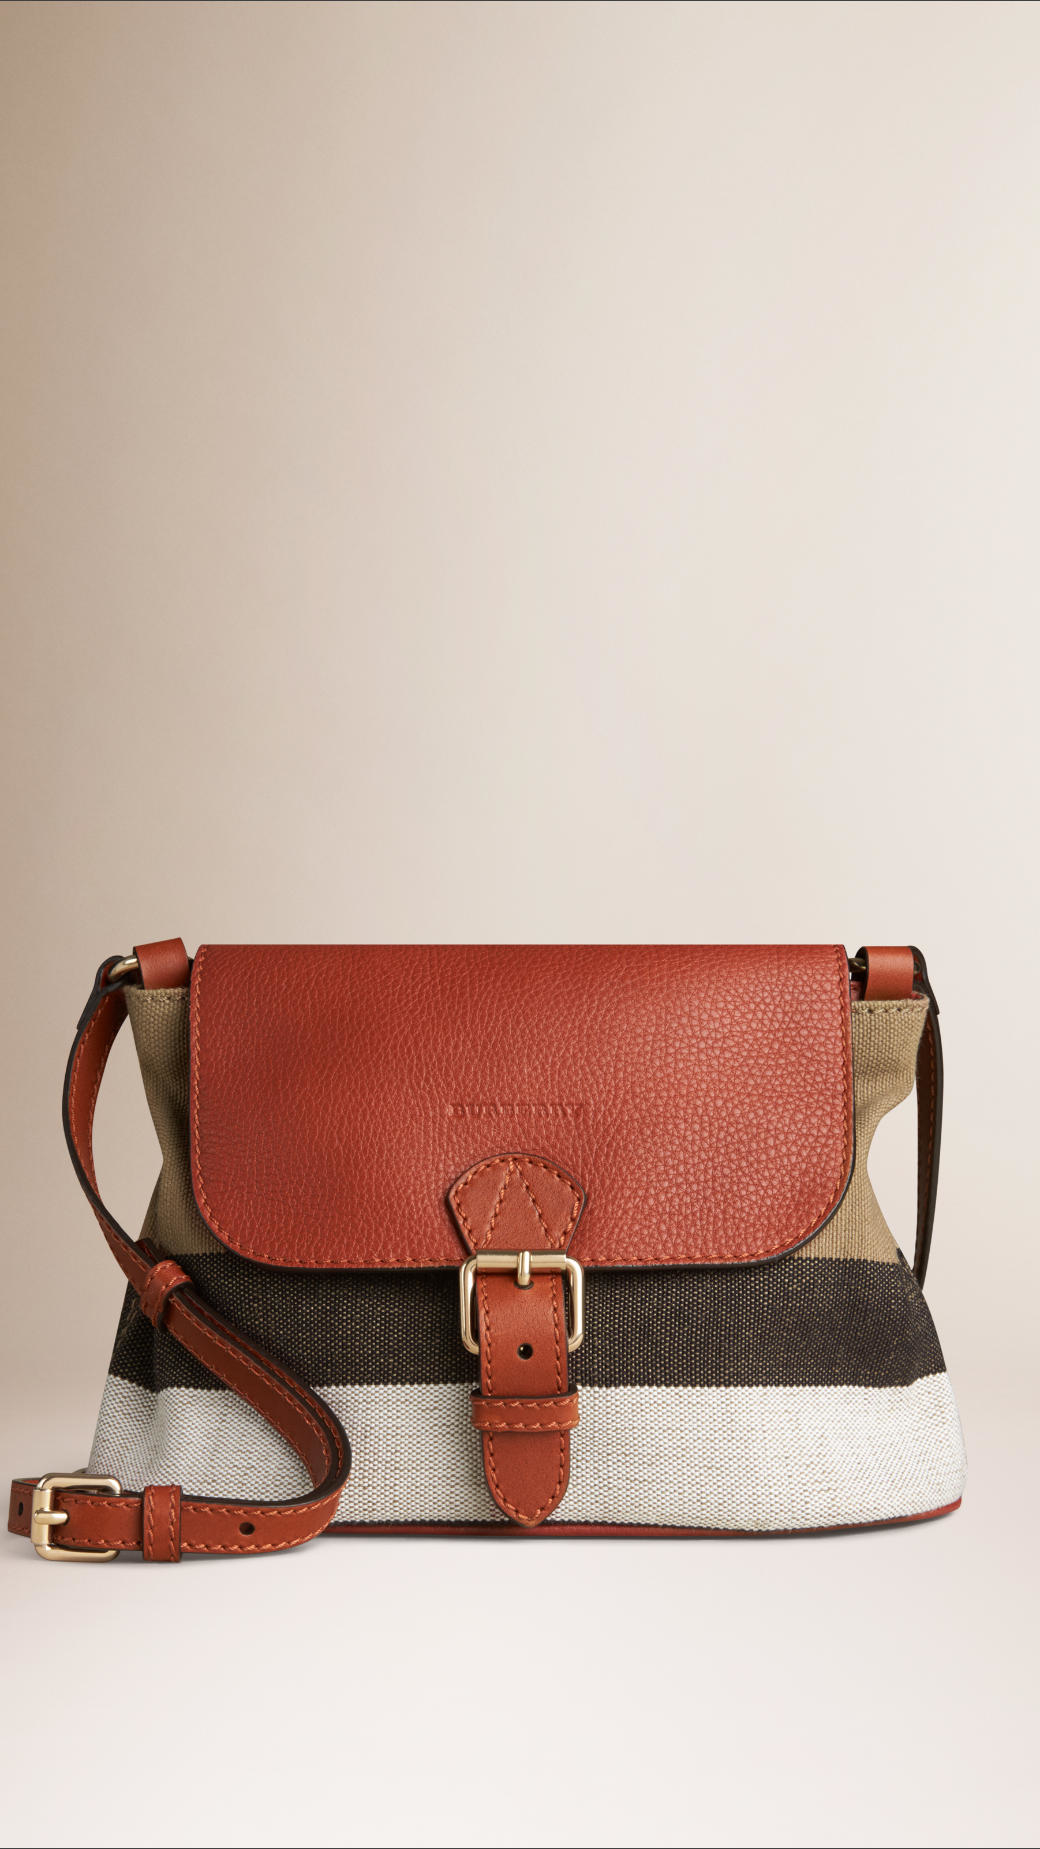 Lyst - Burberry Small Canvas Check And Leather Crossbody Bag in Brown